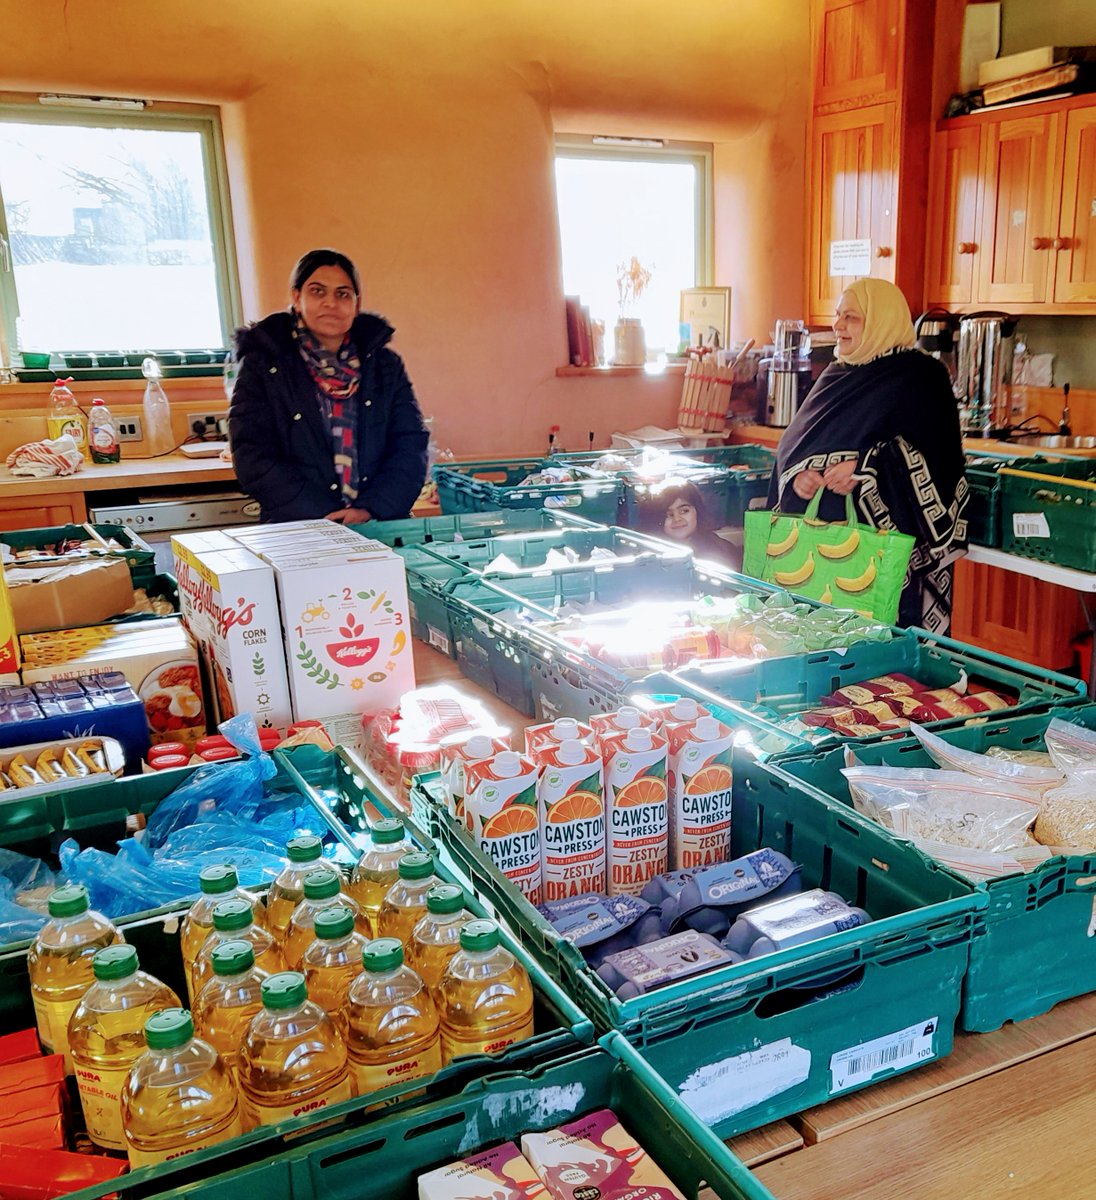 We're looking forward to welcoming back local residents to our Community Pantry! We're stocked up and open TODAY - please visit from 1-4pm #CommunityPantry #StrongerCommunities #HealthyLiving #CostOfLivingCrisis #WarmSpace #CommunityKitchen #CommunityGarden #GrassRoots